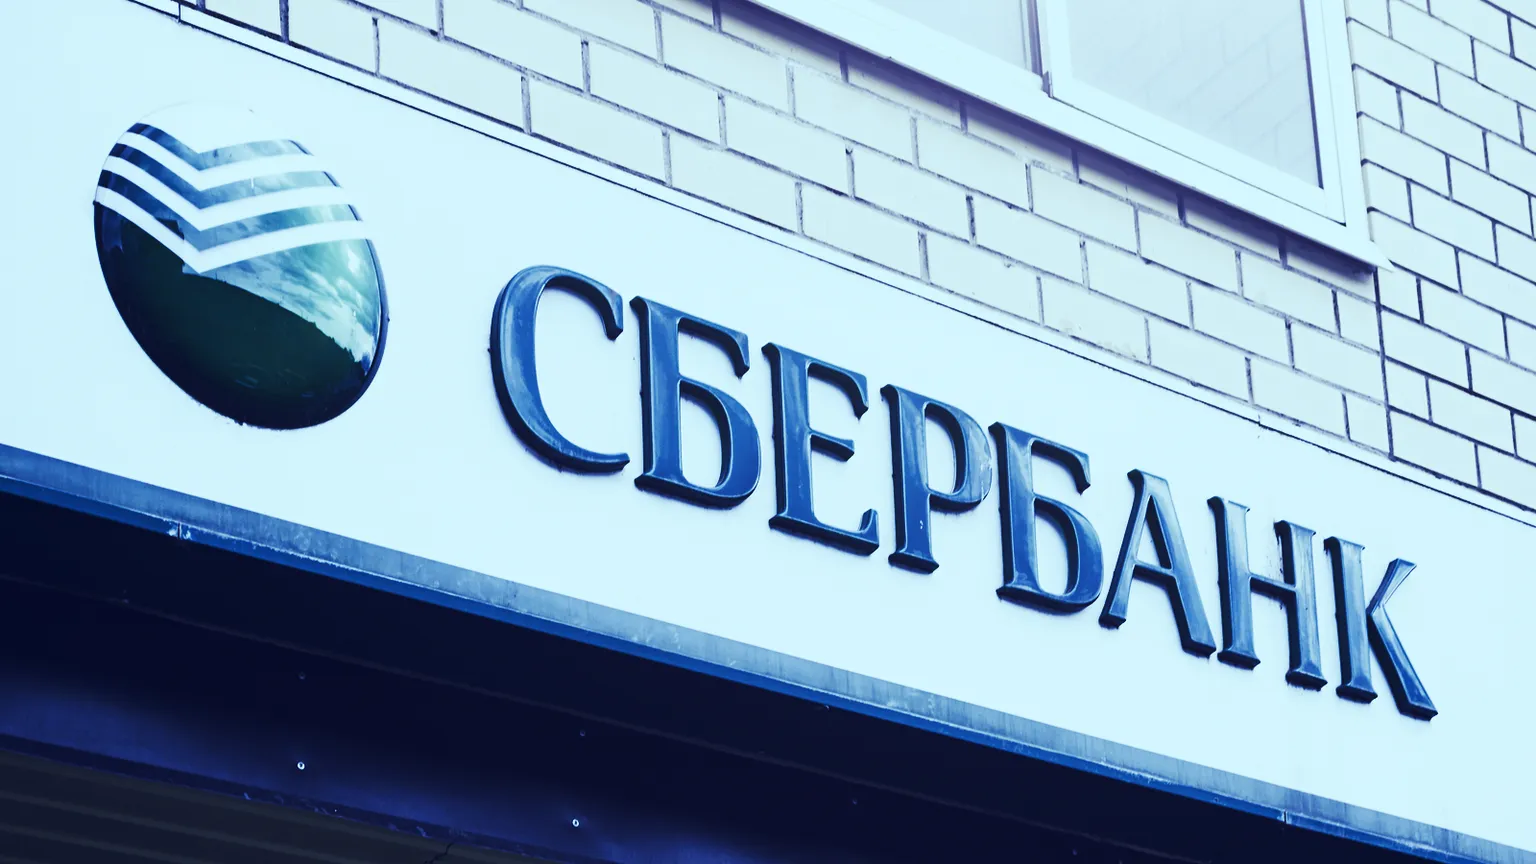 Logo of Sberbank - the largest bank in Russia. Image: Shutterstock